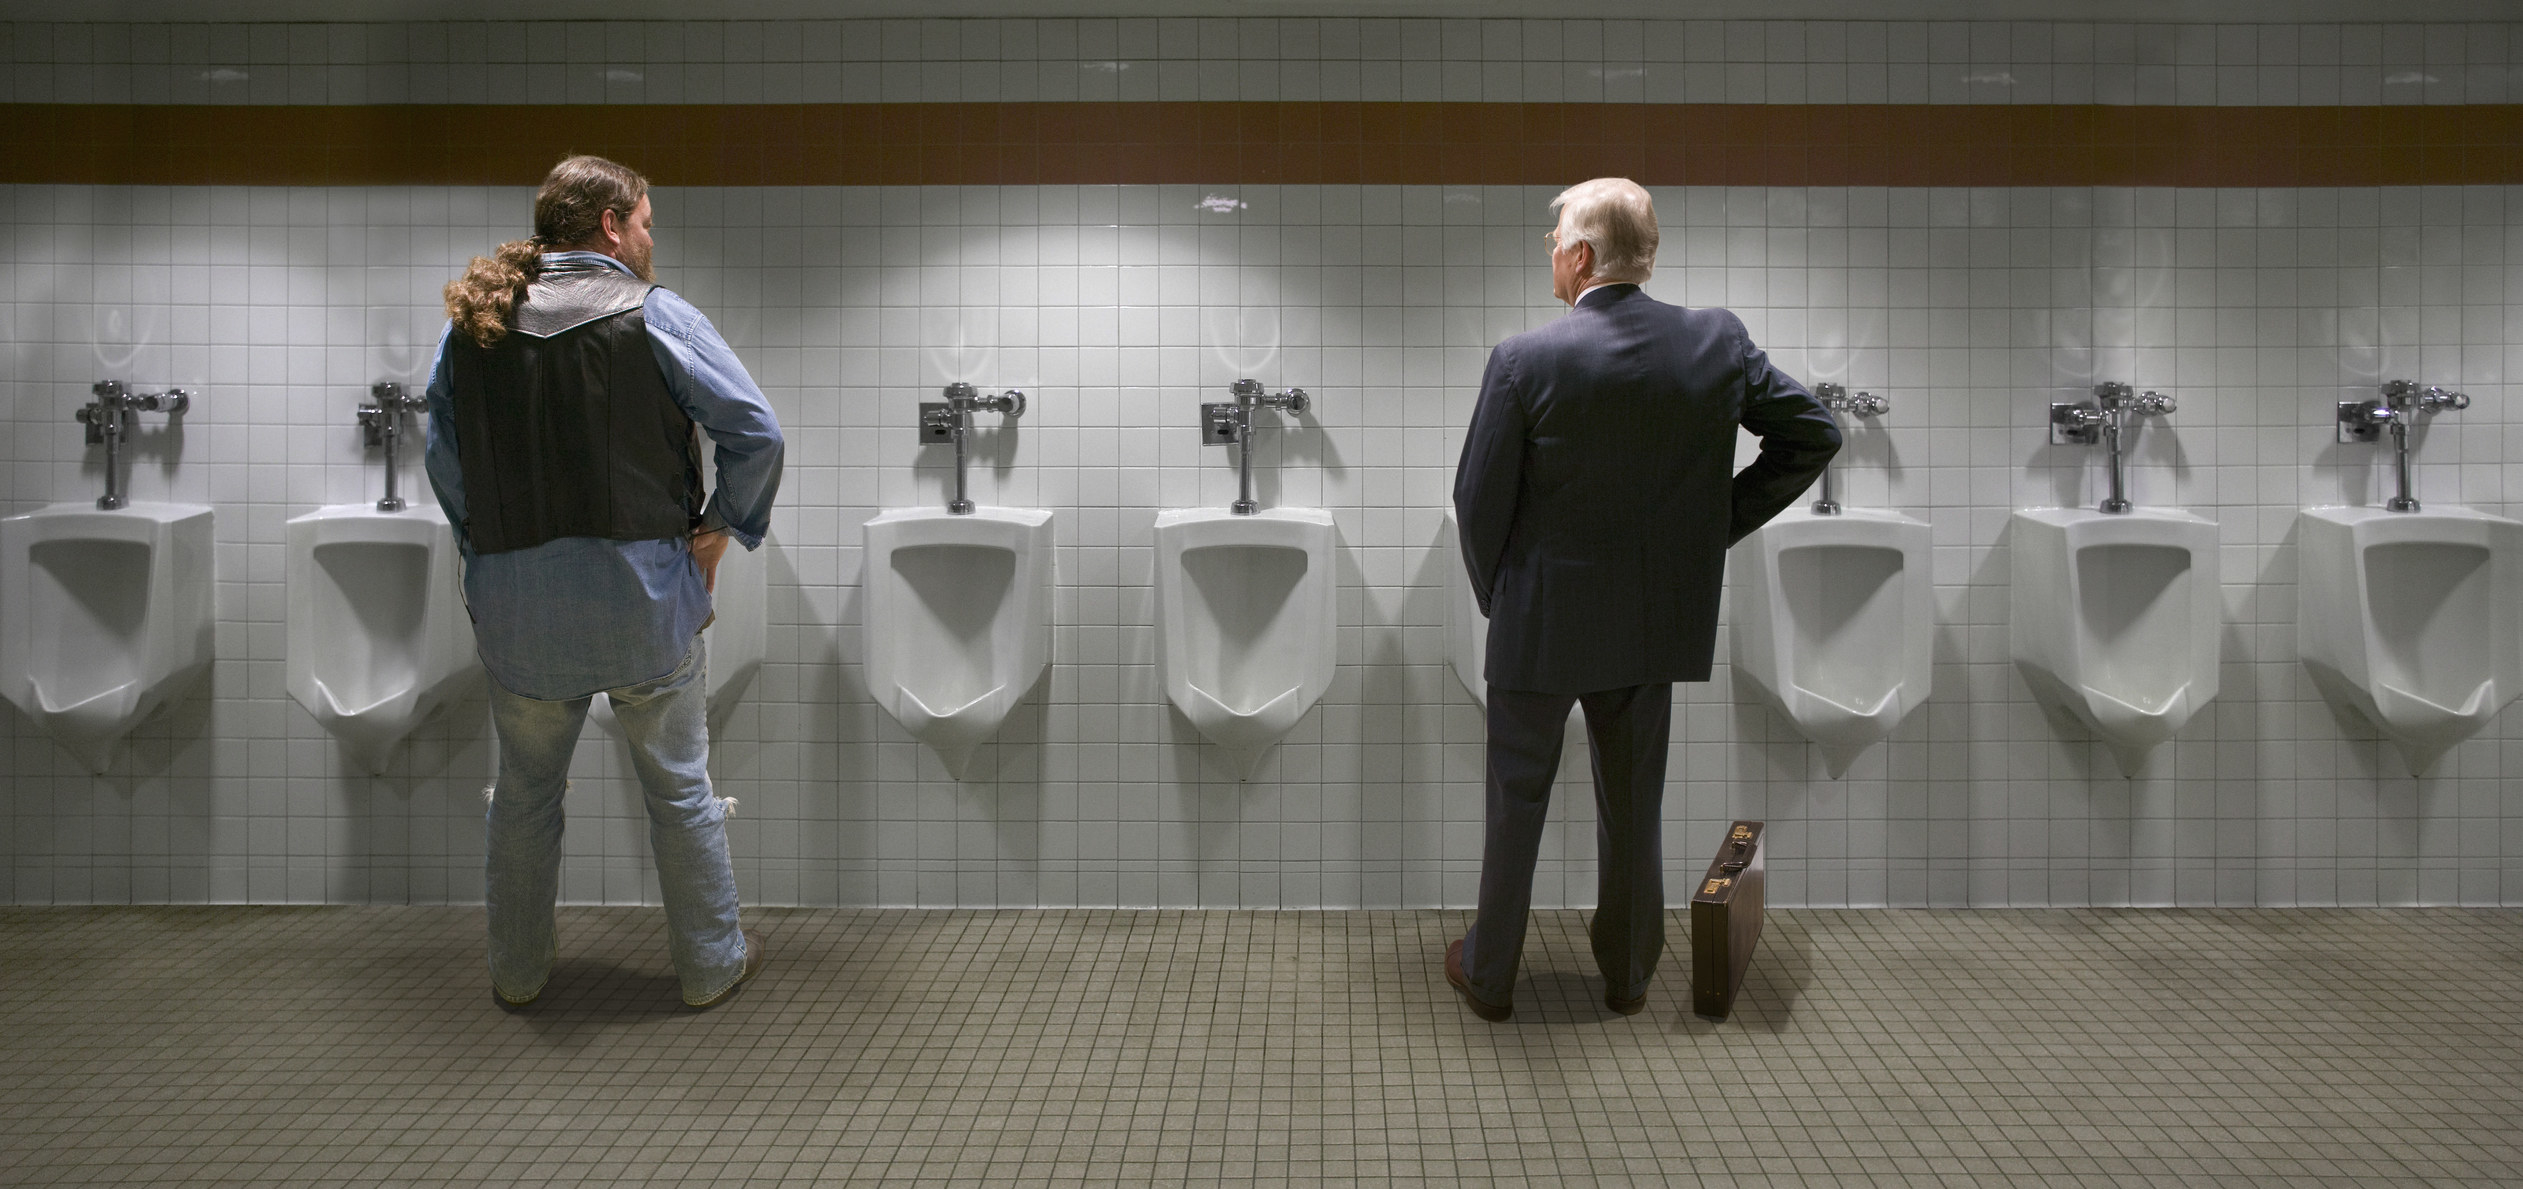 Two people standing at urinals with space in between. 